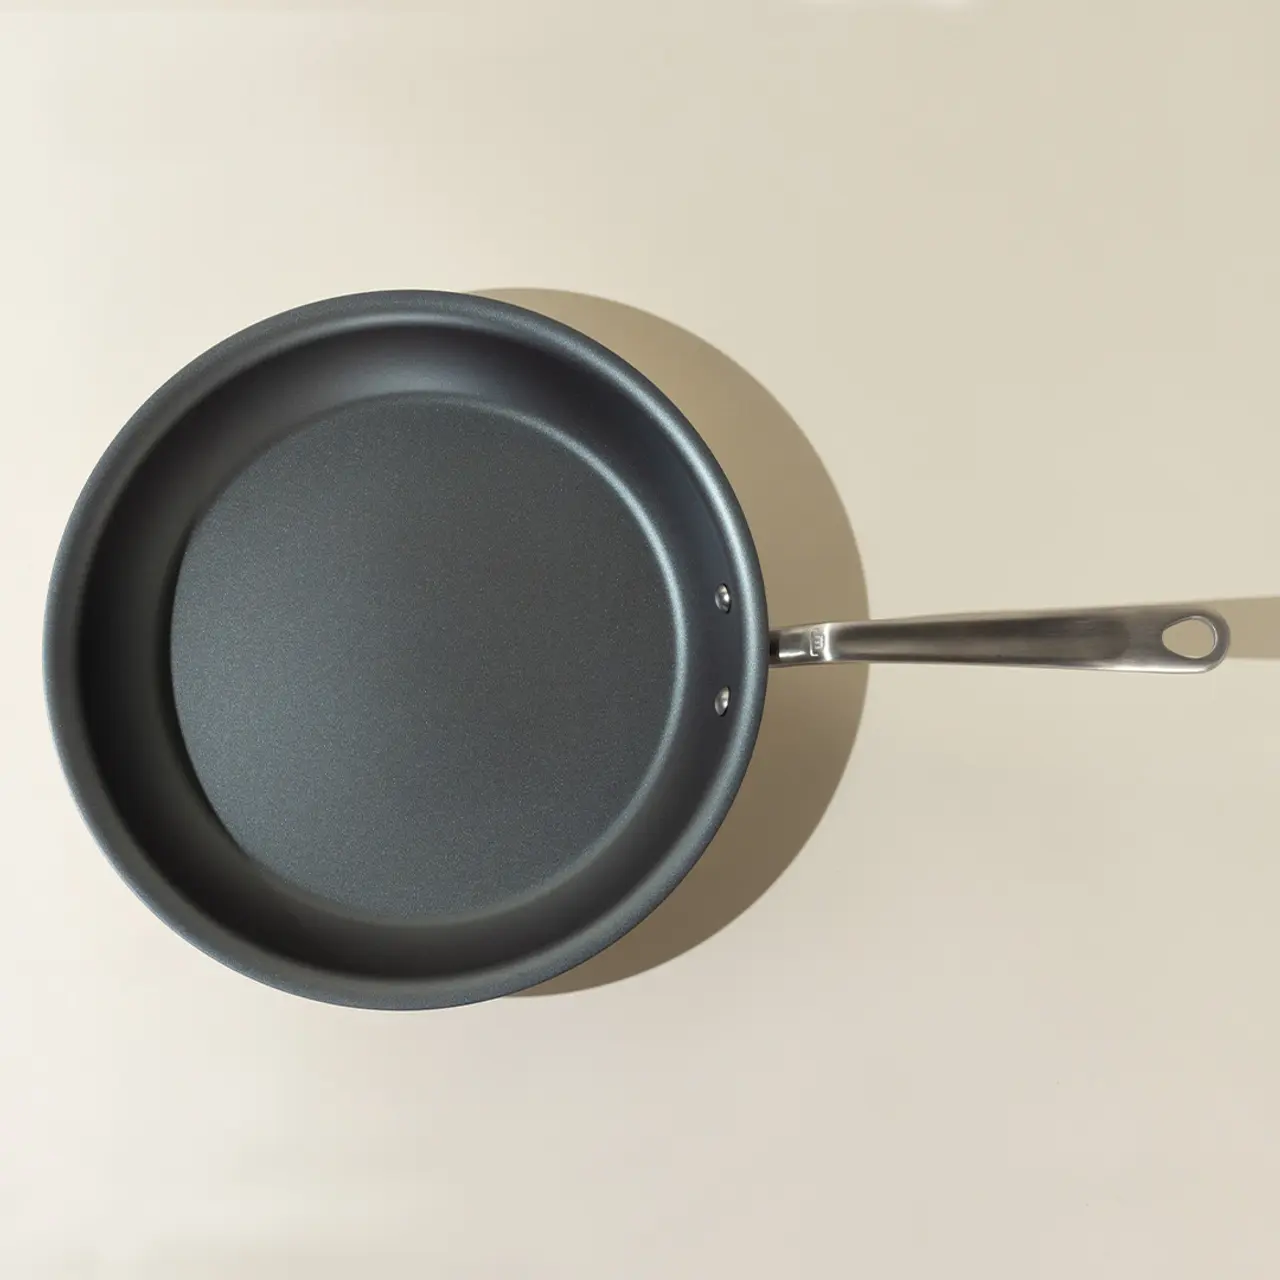 A non-stick frying pan with a stainless steel handle is viewed from above.